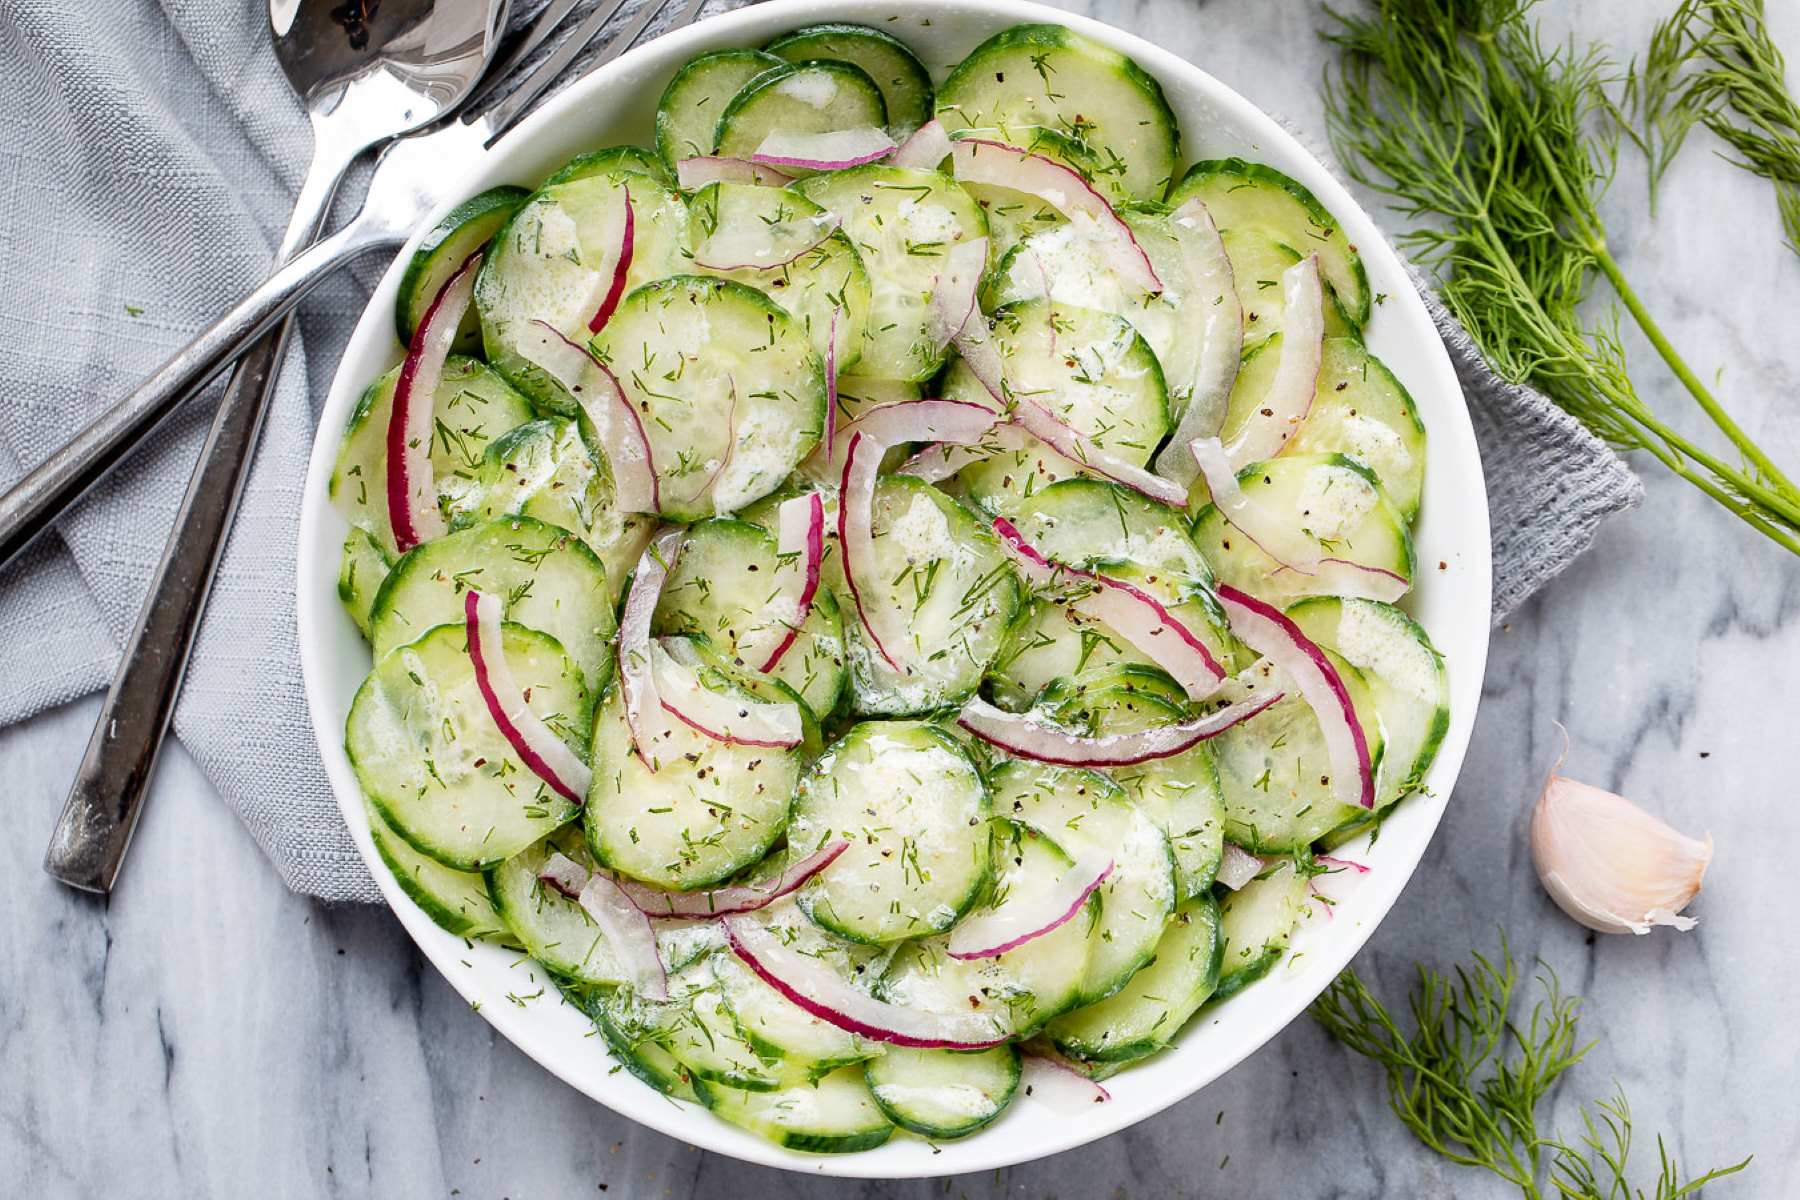 Delicious Cucumber Salad With Red Onion And Dill - Perfect For Foodies